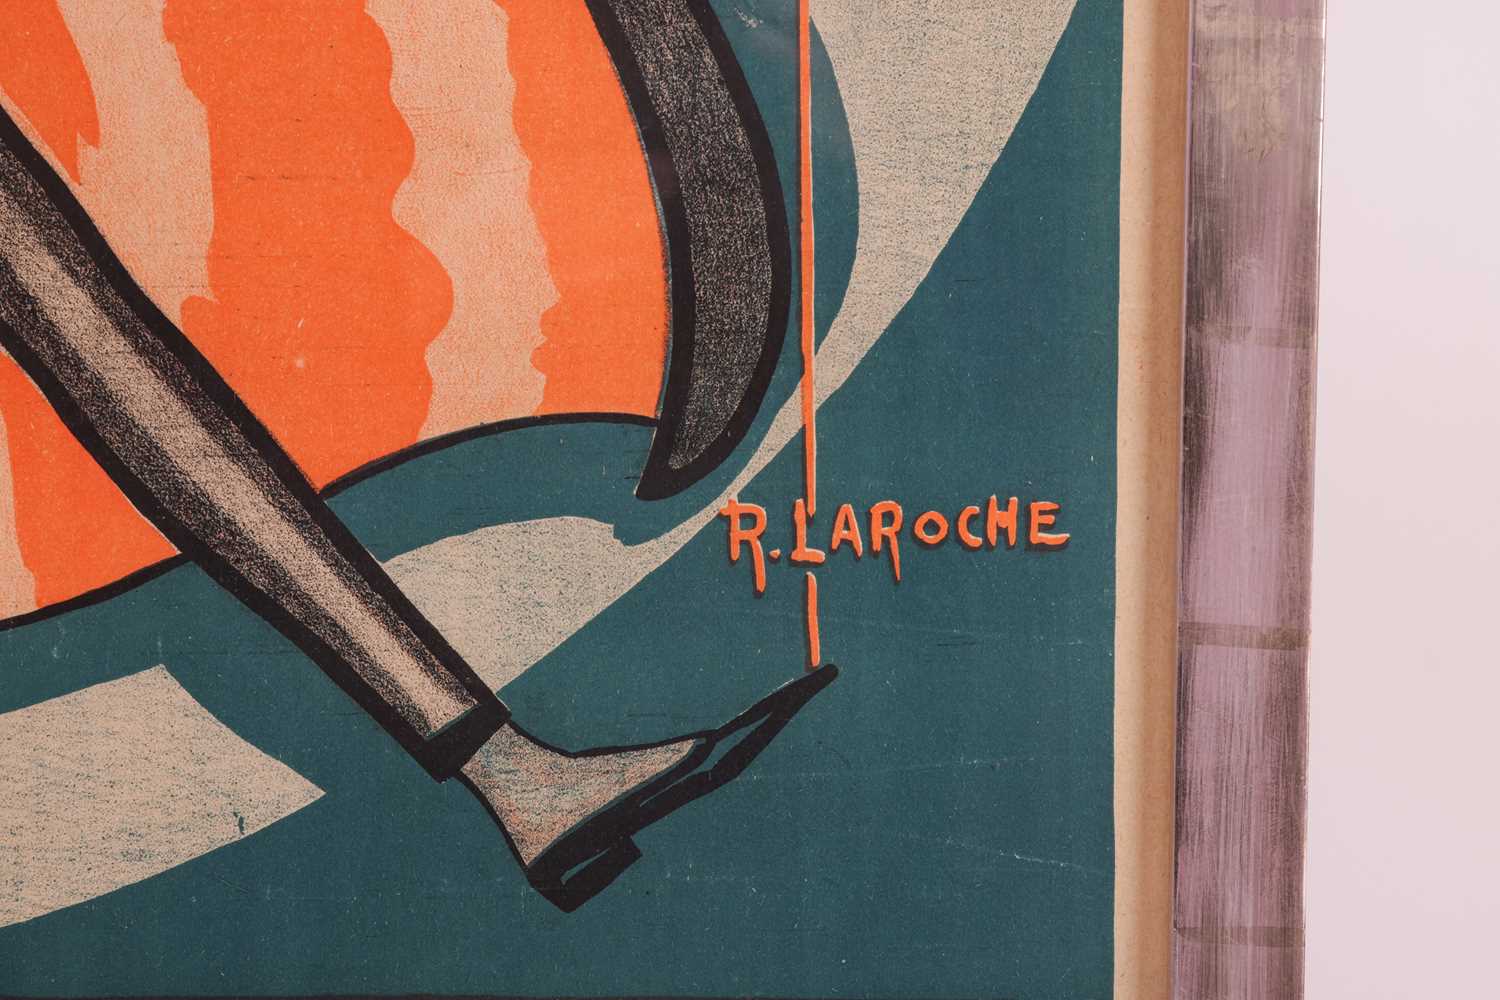 R Laroche (20th century), 'Épouse-La', a French art deco lithographic poster, 117 cm x 78 cm, framed - Image 8 of 9